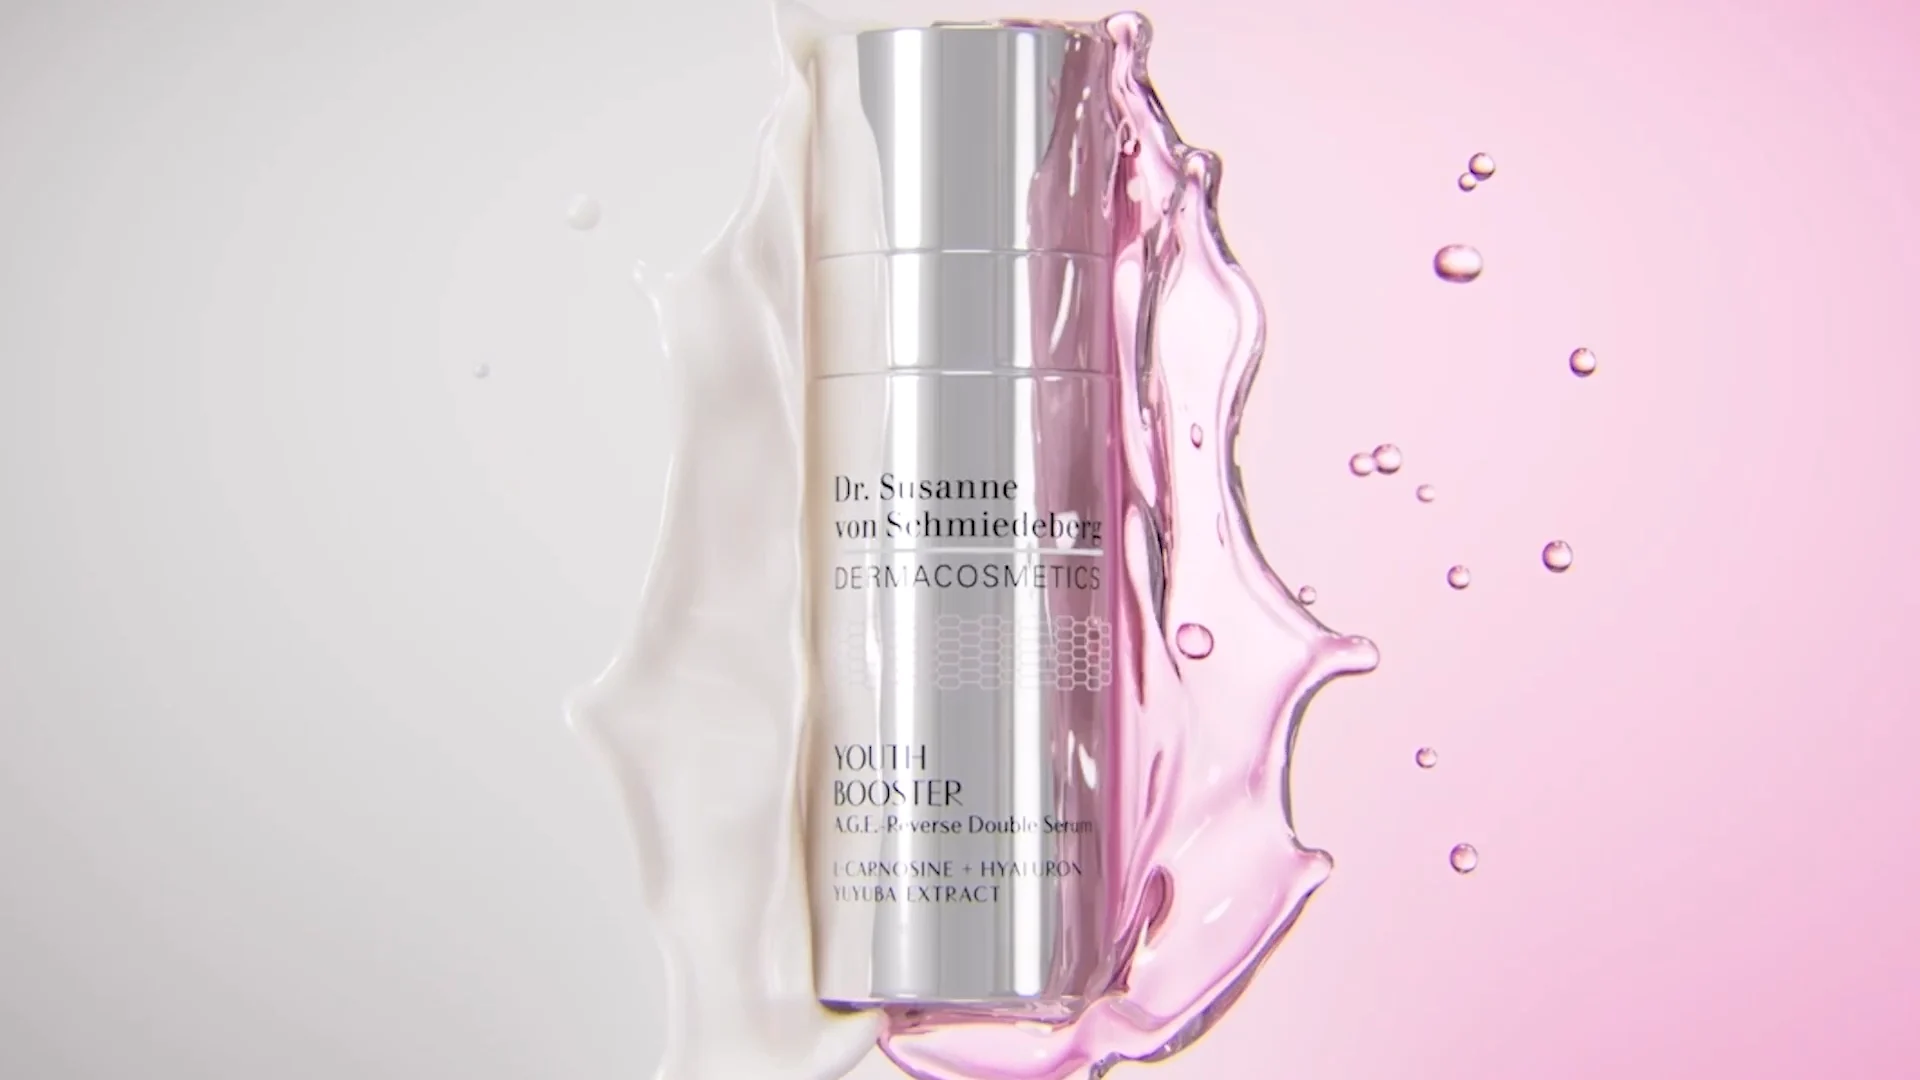 a silver derma cosmetic youth booster serum botte coming out of two liquids which are split in the middle. on the right side there is a transparent magenta liquid and on the left side a milky white liquid